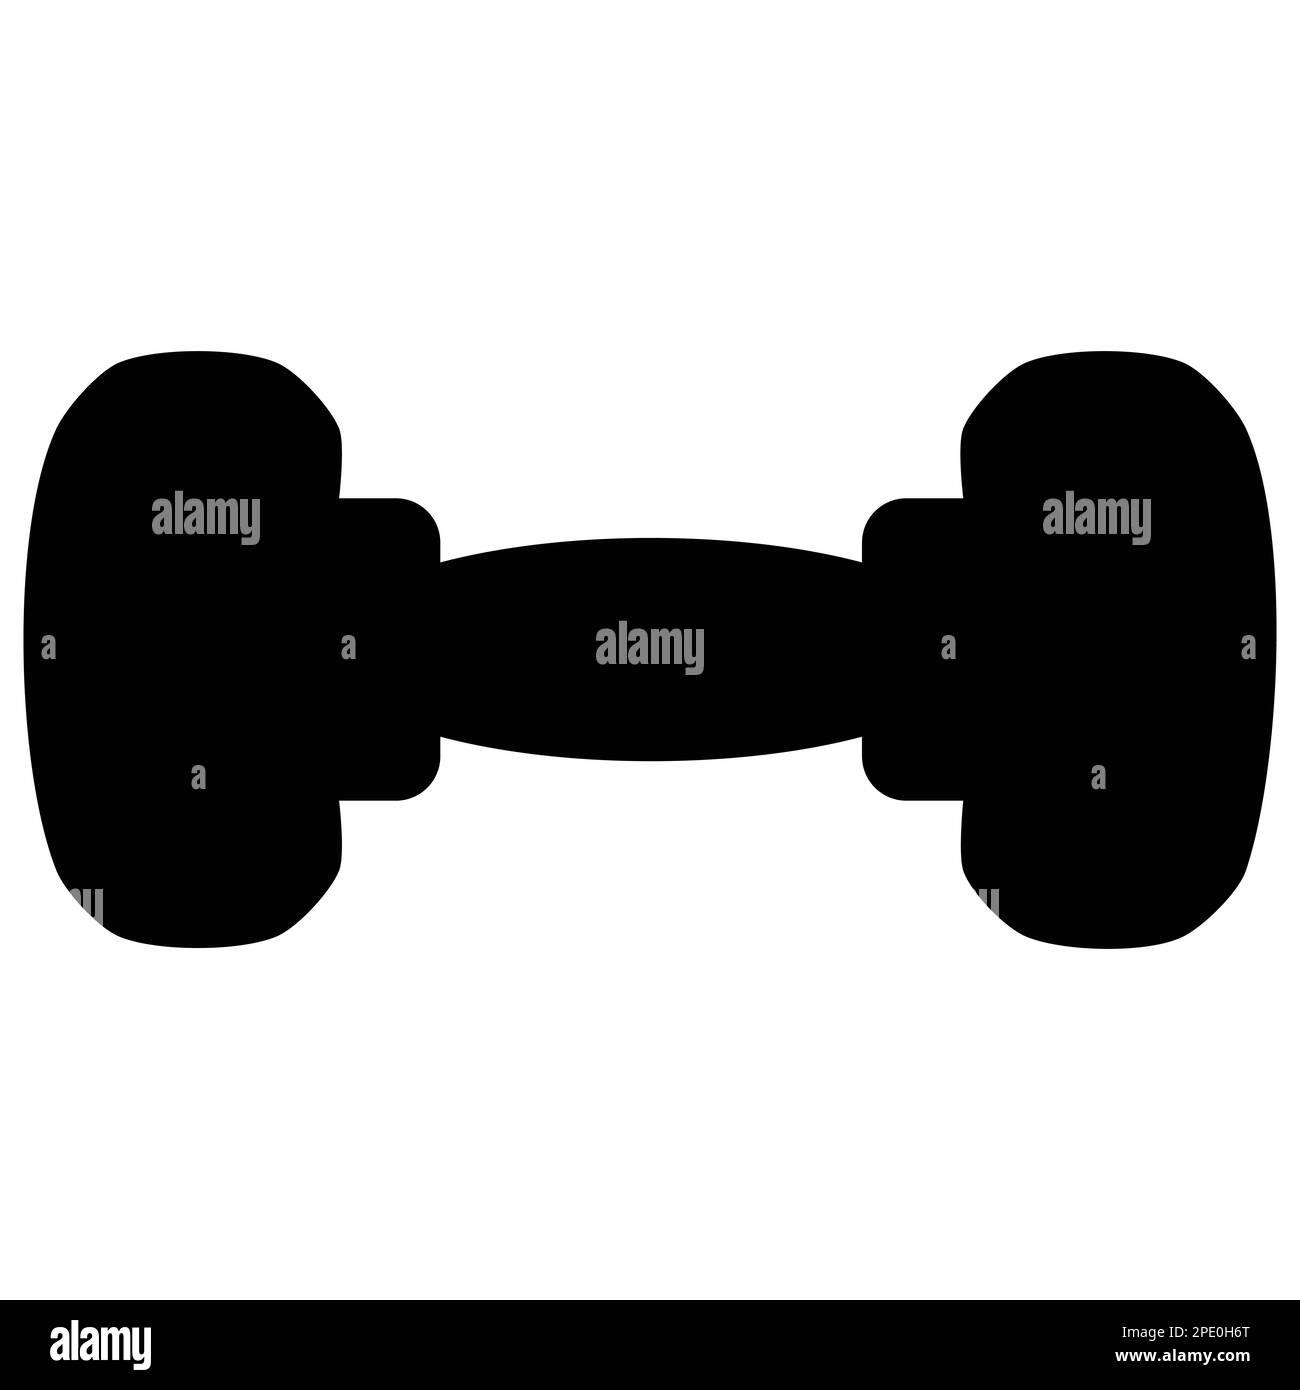 Dumbbell for gym icon, simple flat style trendy black color vector illustration graphic object, clip art. Healthy and strong body idea design. Stock Vector